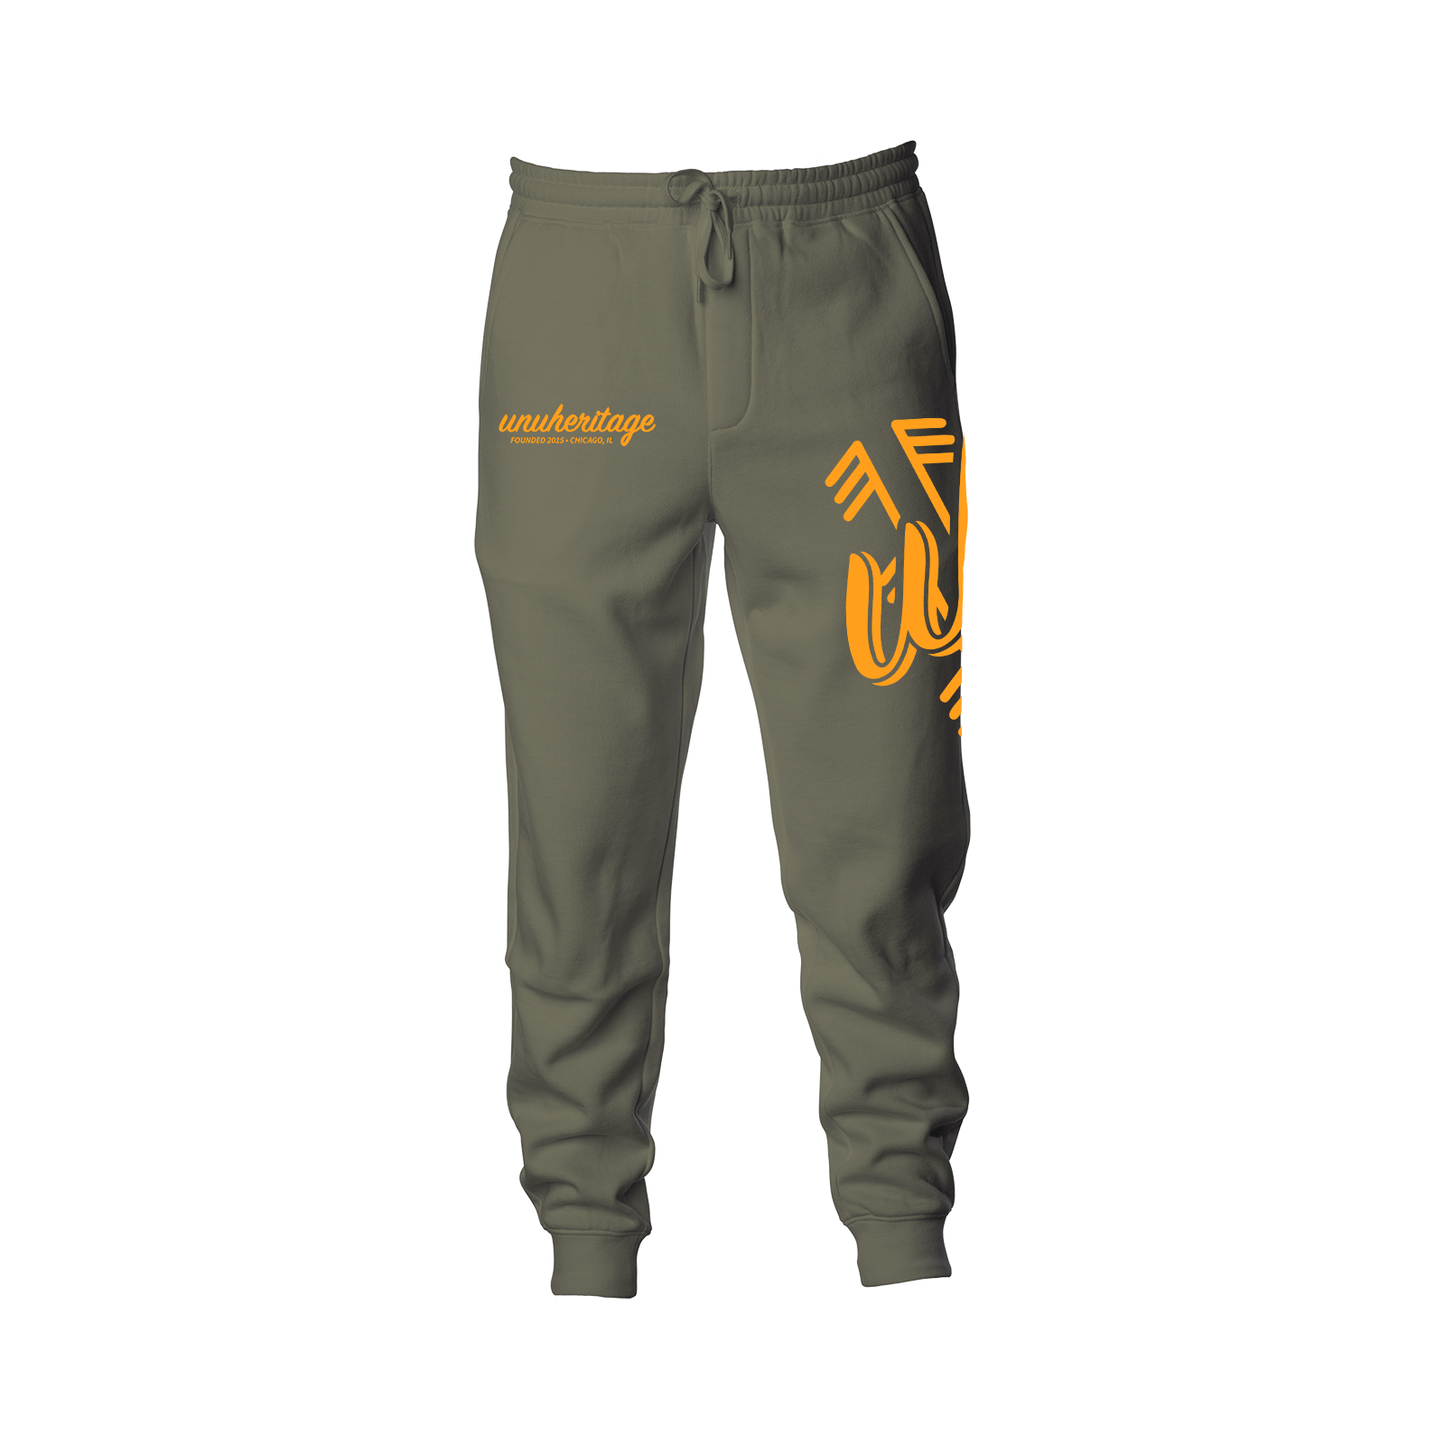 Founded 2015 Joggers - Adult